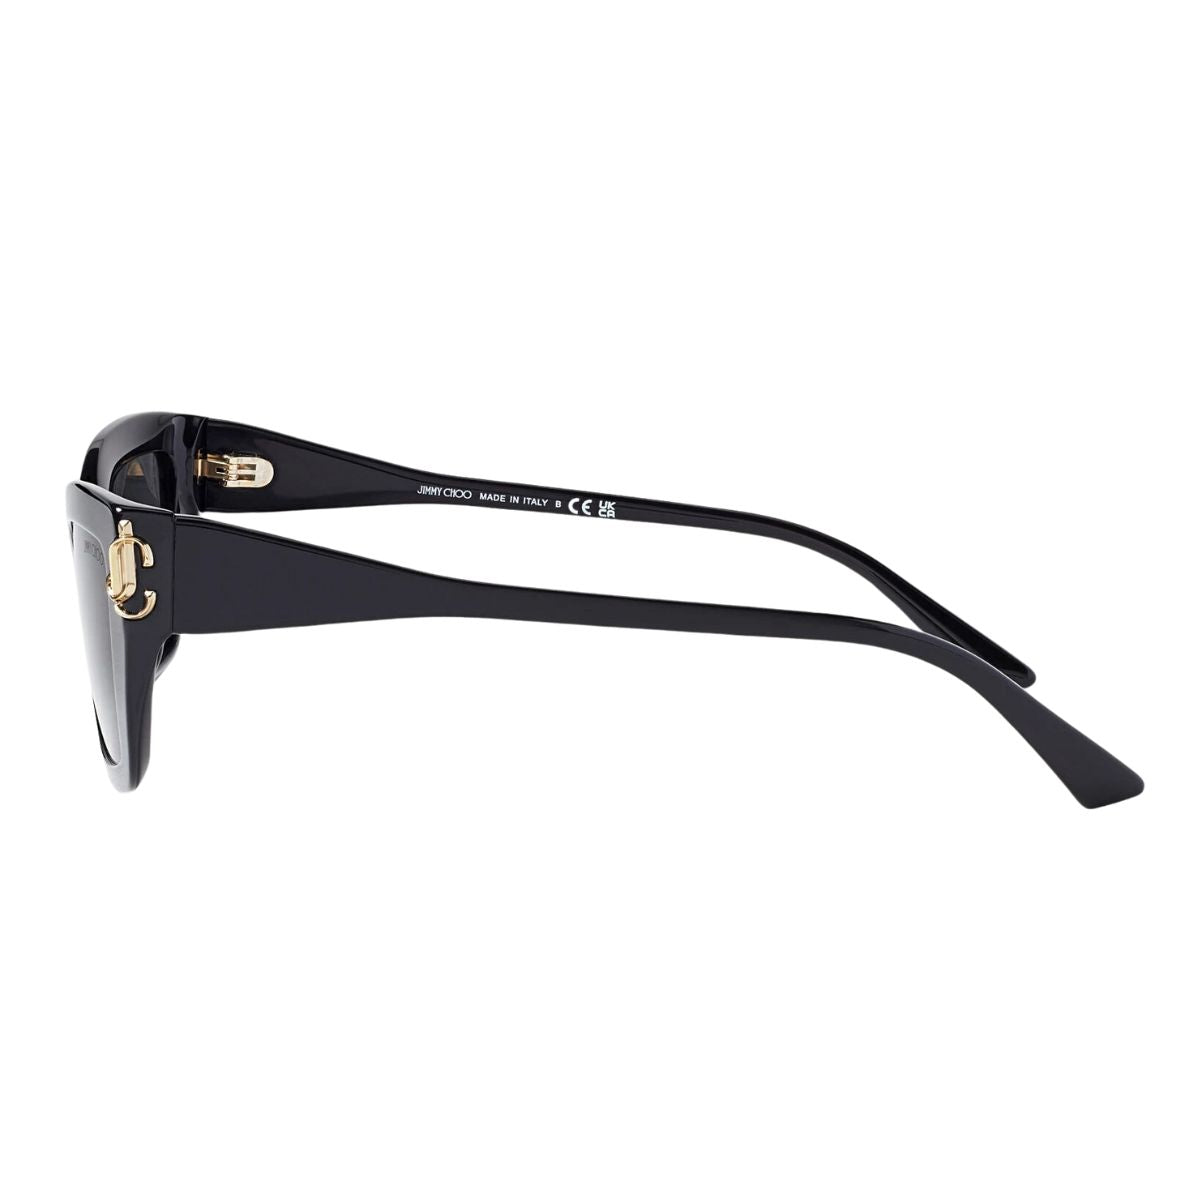 "Buy Trending Jimmy Choo Cat Eye UV Protection Sunglasses For Womens At online | Optorium Offering Discounts On Women's Sunglasses" 